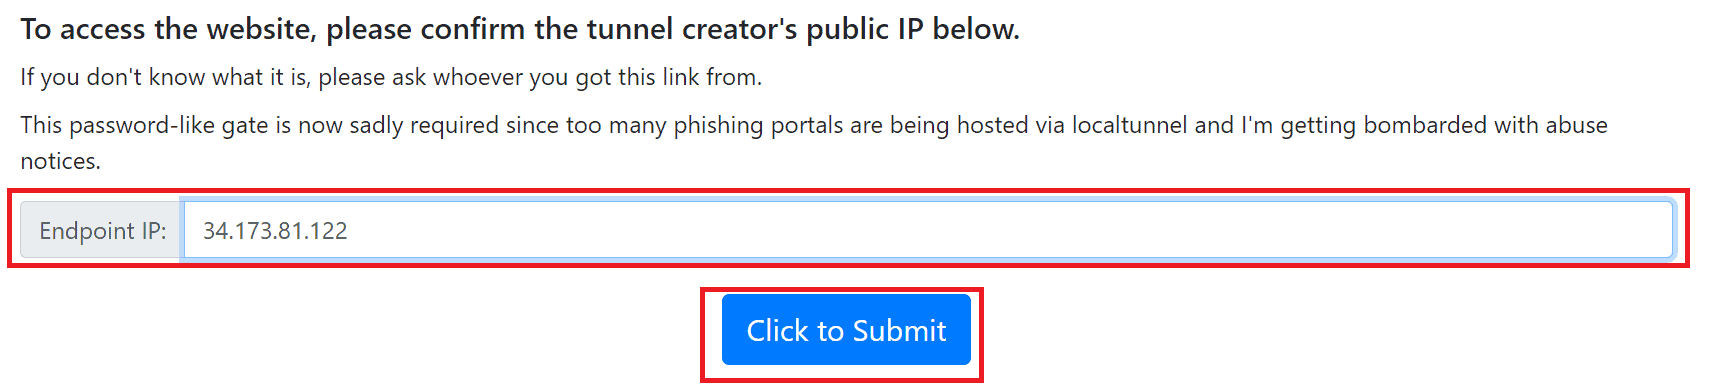 paste ip and click submit